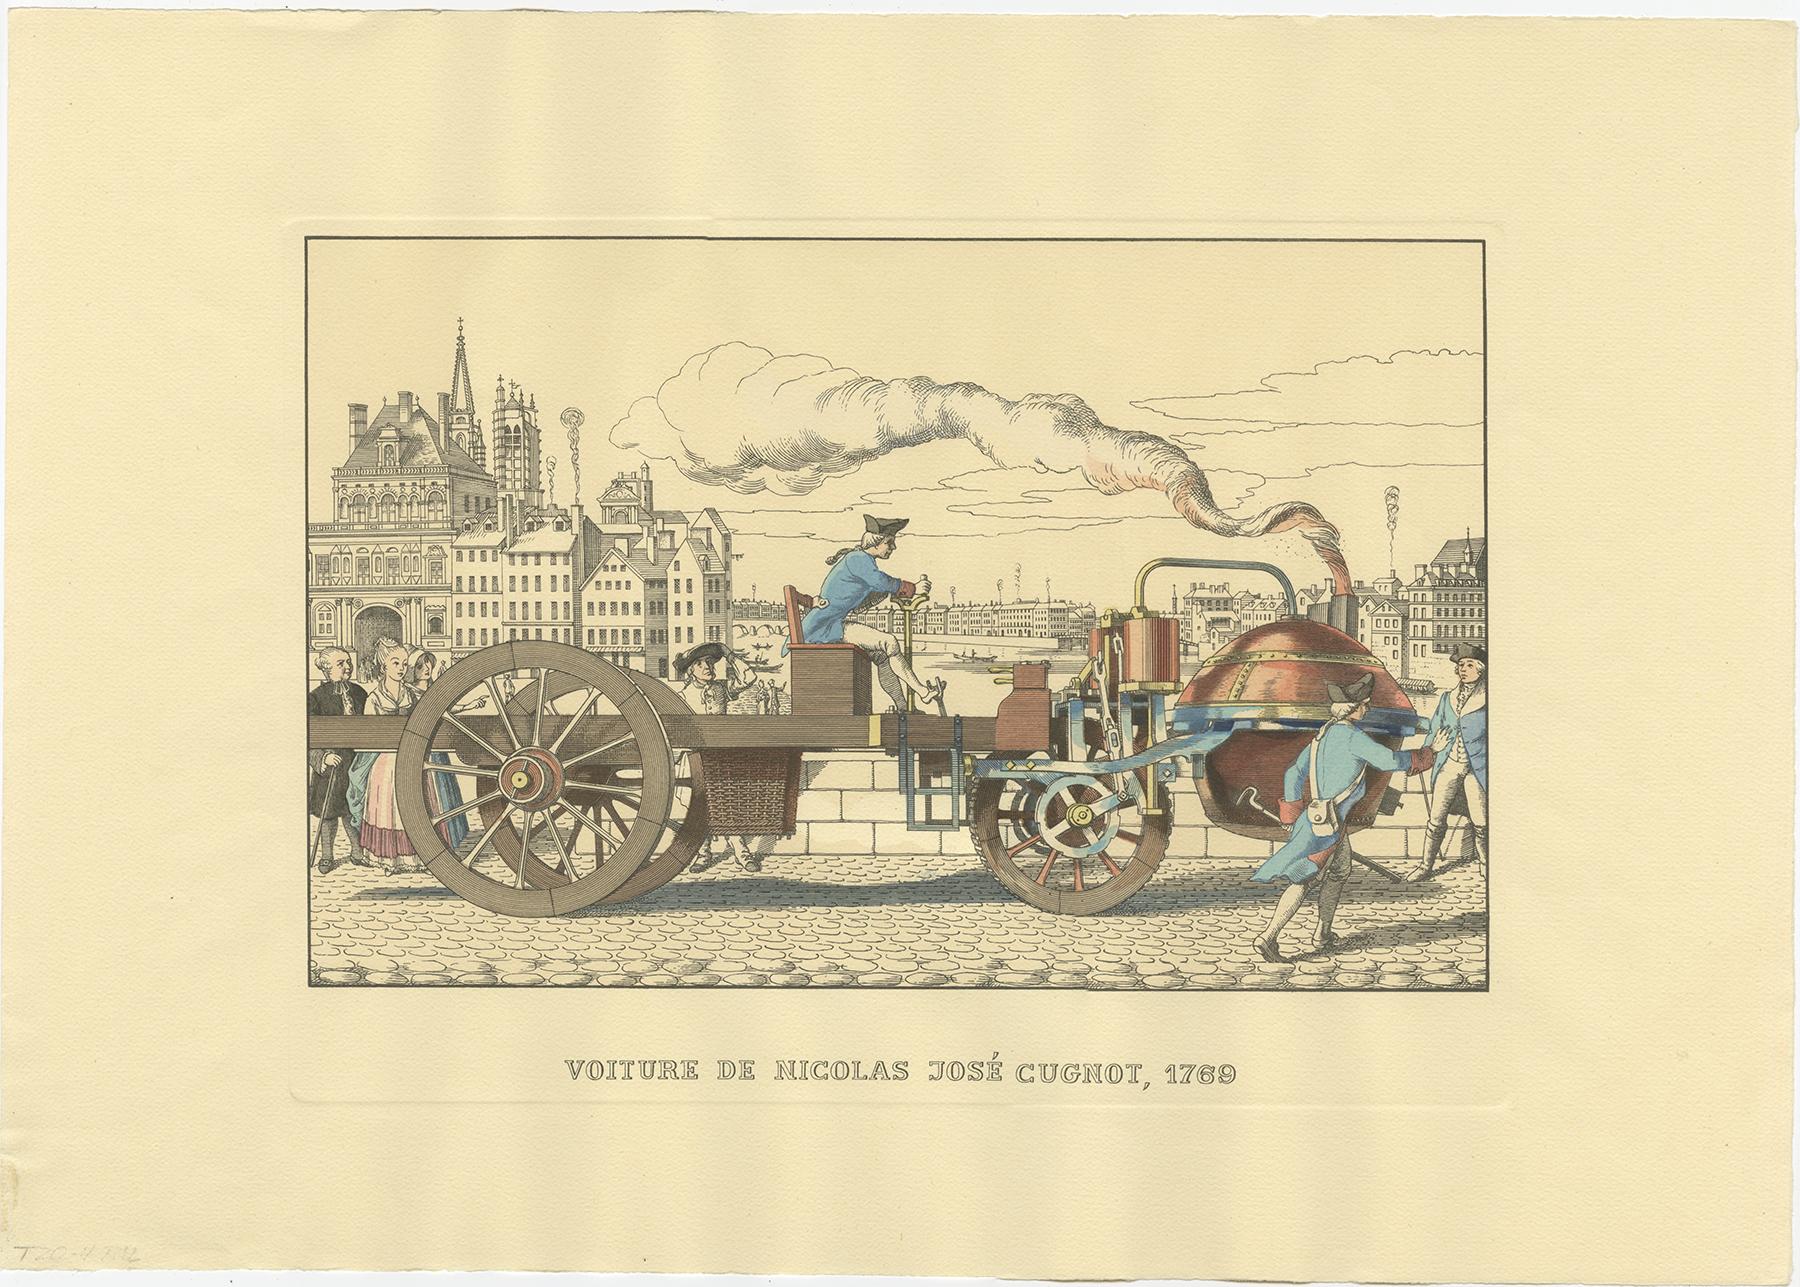 Set of six prints illustrating various inventions including:

1) Triumphal Carriage by Hans Hautsch
2) Car of G. Gurney
3) Wind Chariot by Simon Stevin
4) The vehicle of Nicolas José Cugnot
5) The invention of W. Murdock
6) The Siegfried